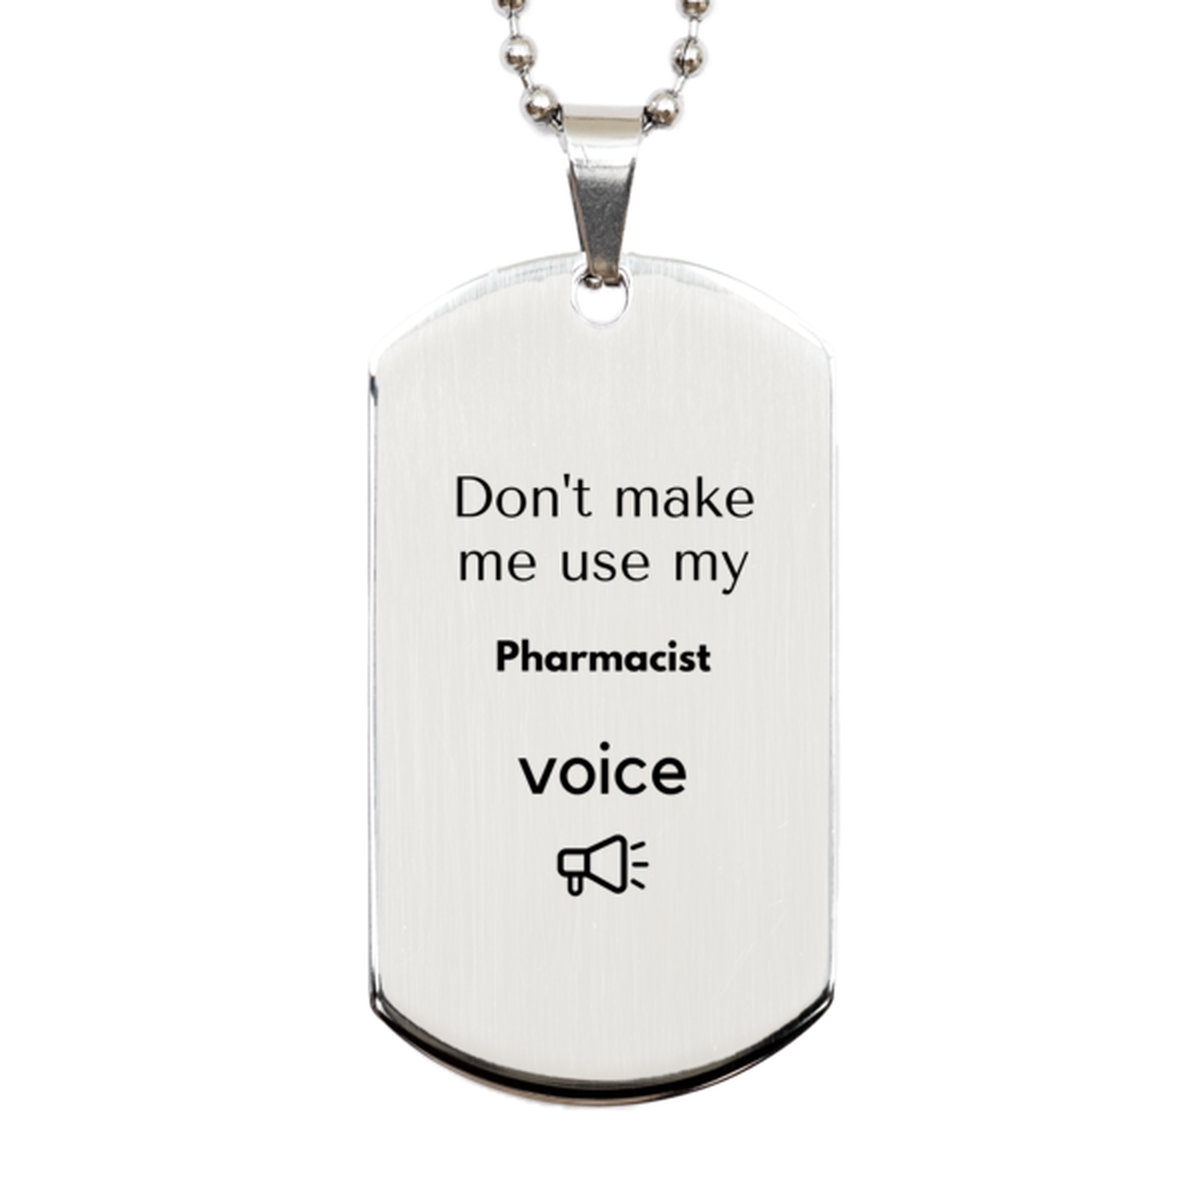 Don't make me use my Pharmacist voice, Sarcasm Pharmacist Gifts, Christmas Pharmacist Silver Dog Tag Birthday Unique Gifts For Pharmacist Coworkers, Men, Women, Colleague, Friends